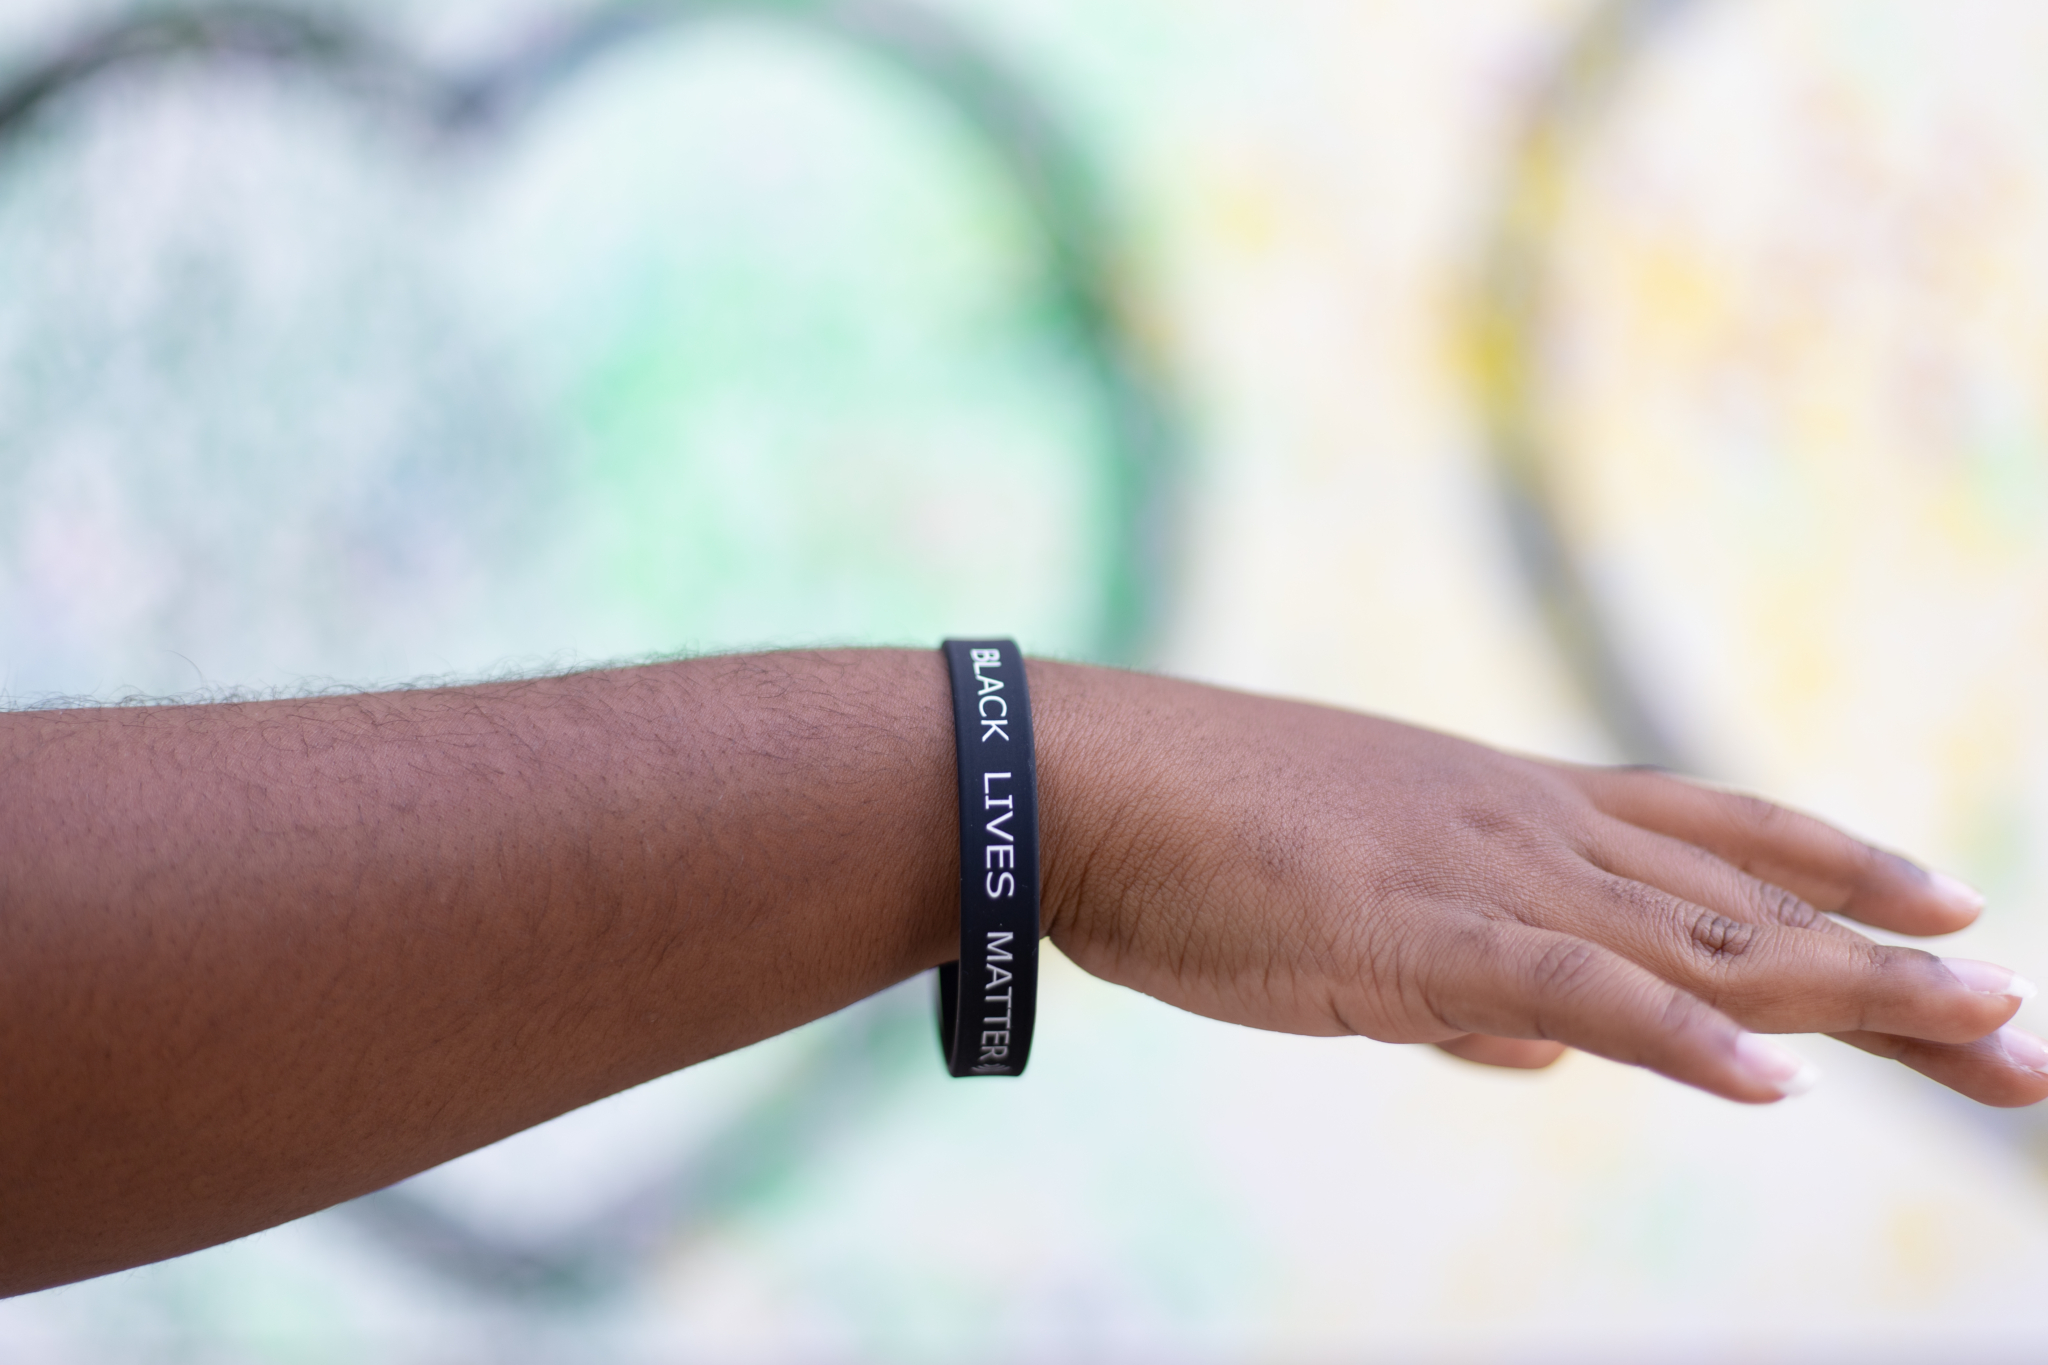 Linq 5673 Local tech startup launches $5 smart bracelet to share Black Lives Matter resources